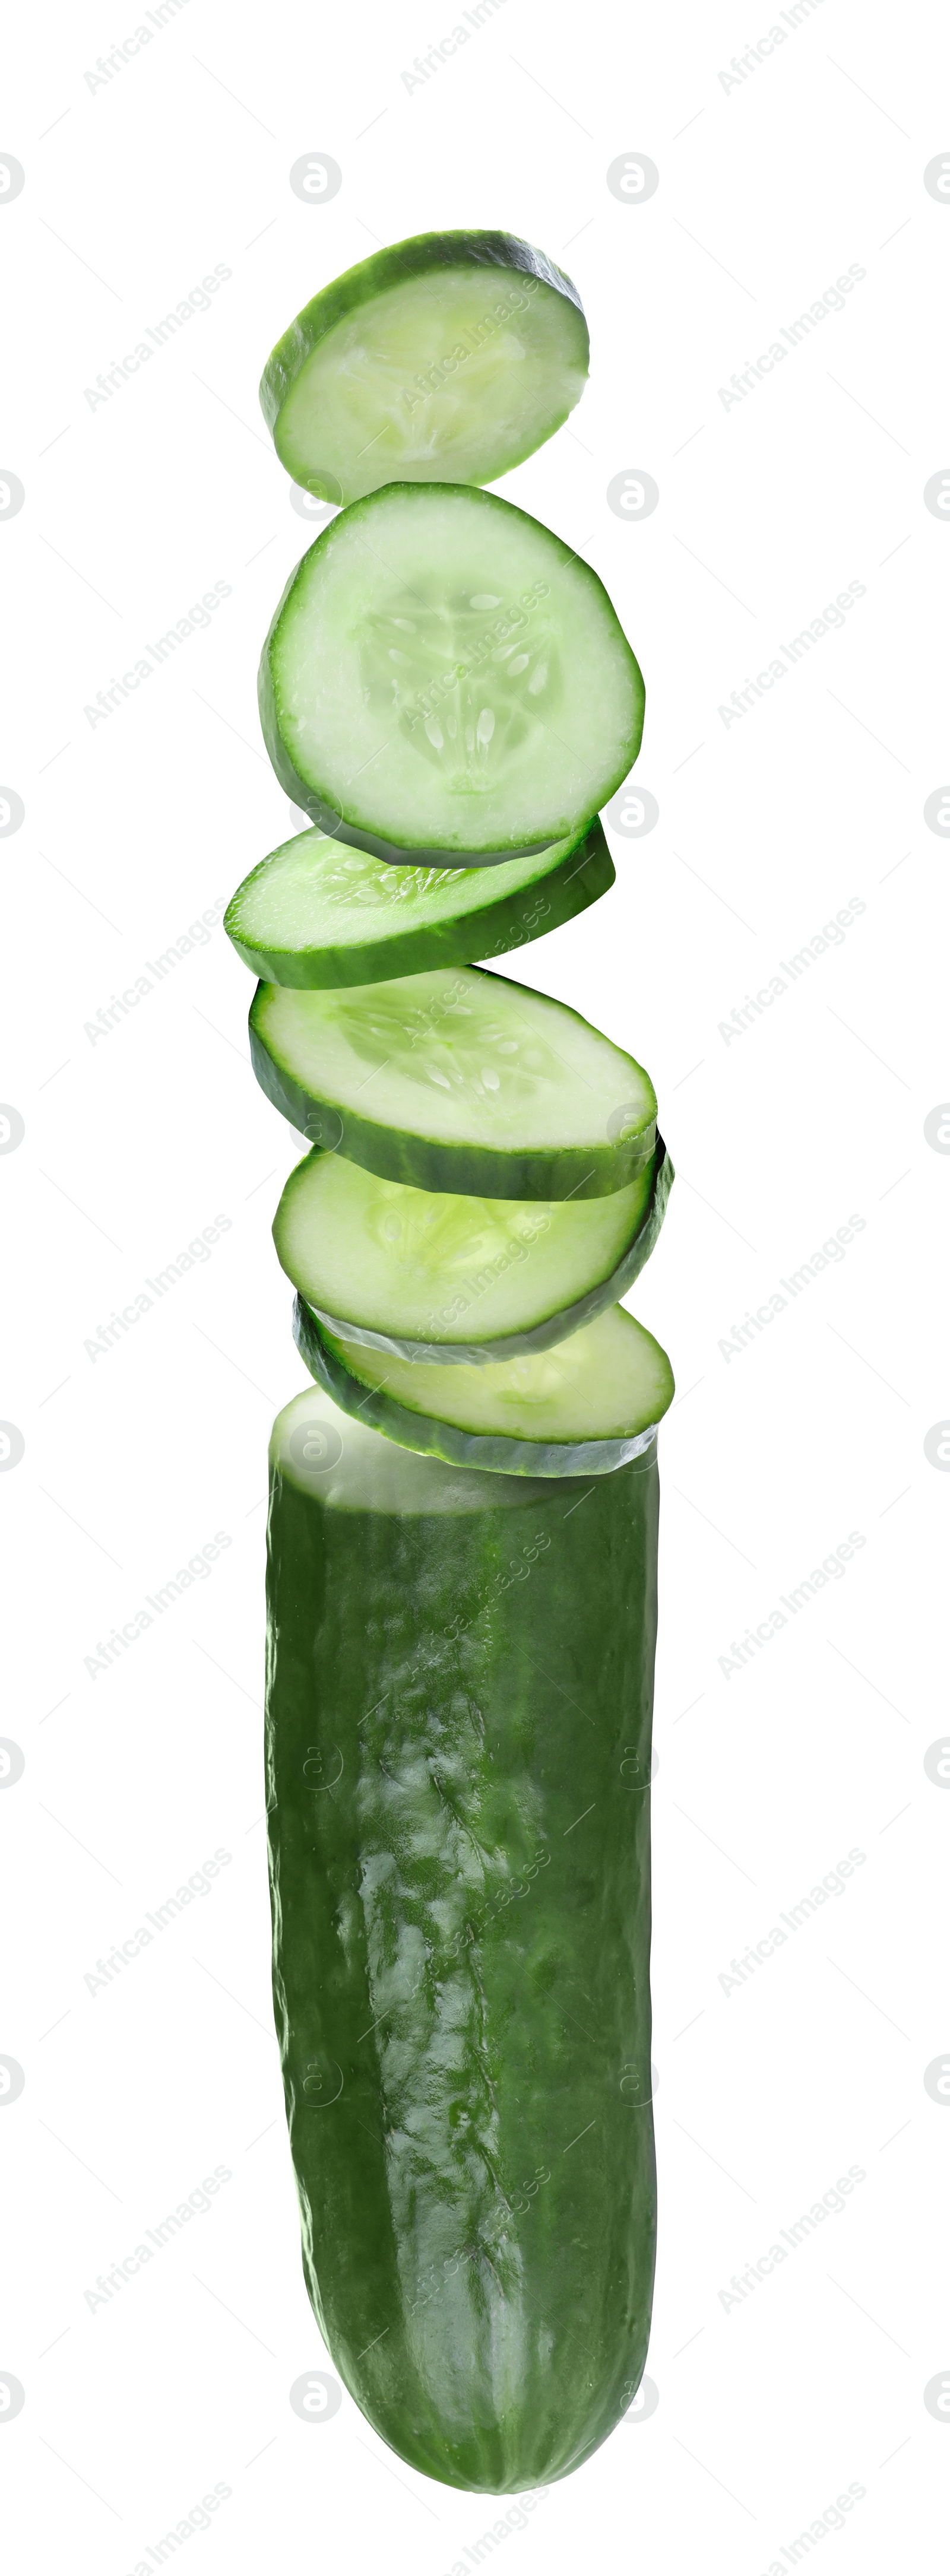 Image of Cut fresh ripe cucumber on white background. Vertical banner design